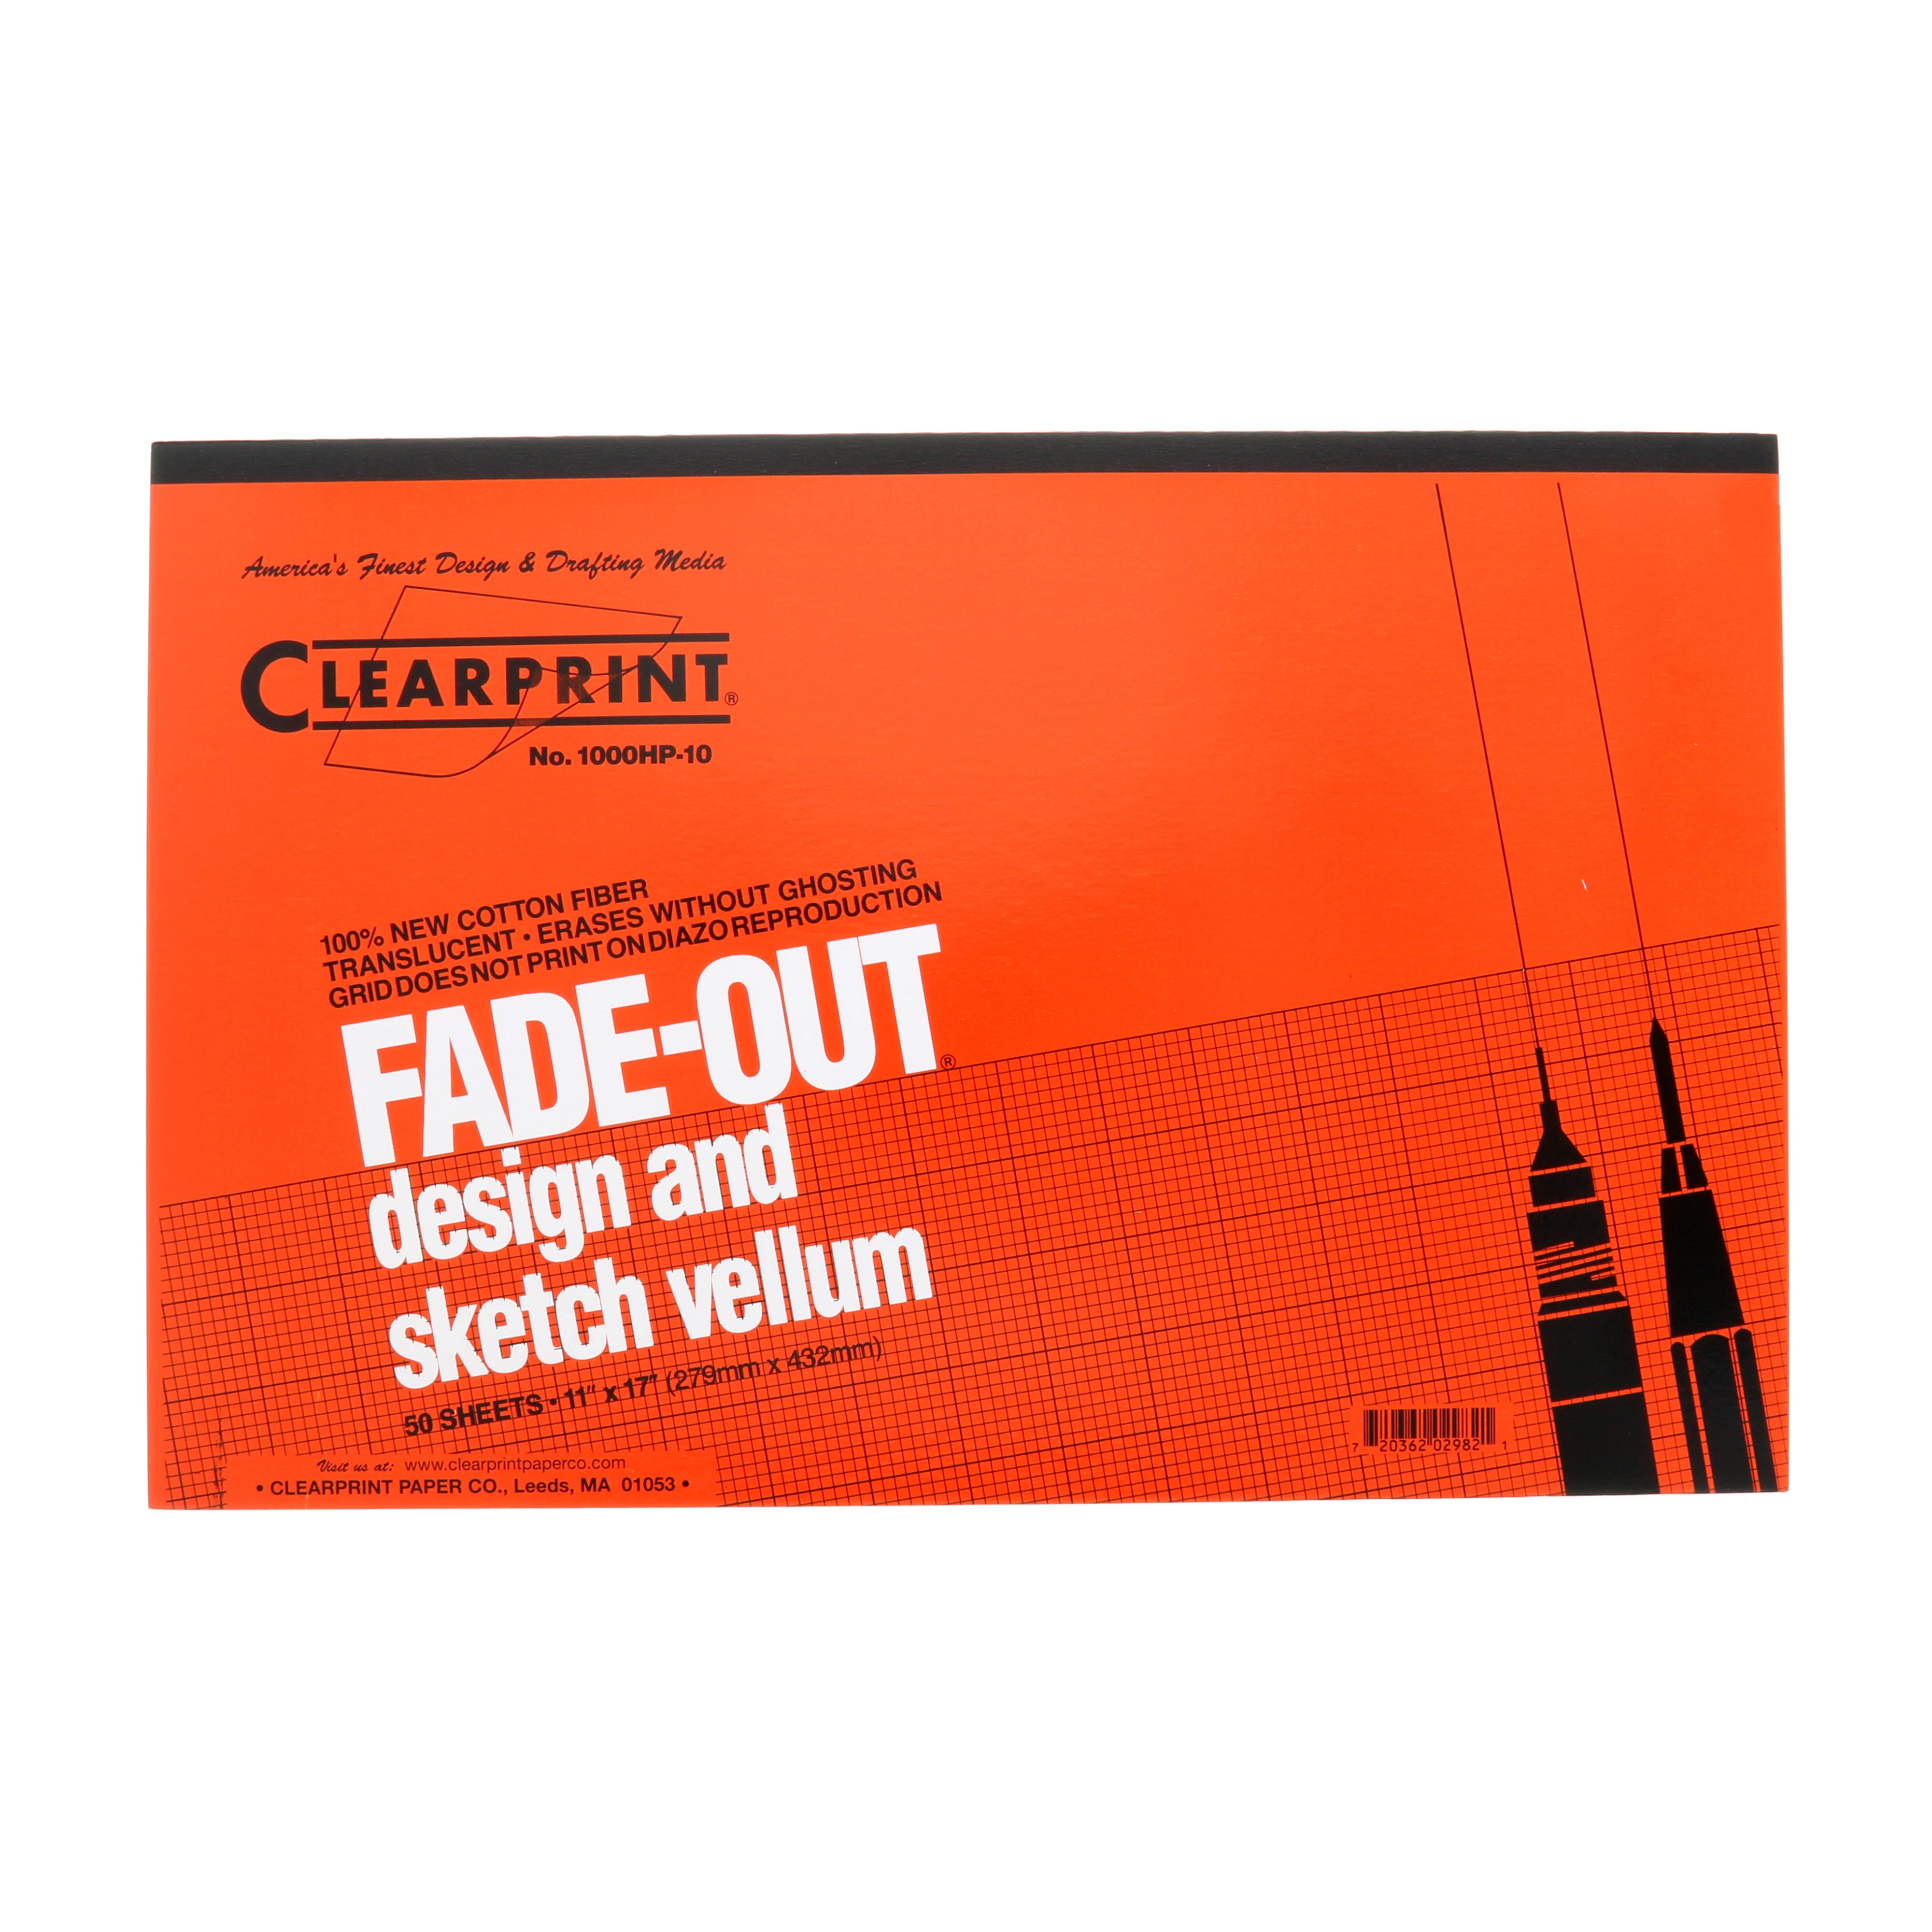 Clearprint 1000HP Series Vellum Design and Grid Sketch Pad - 50 Sheets, 11"x17", Translucent